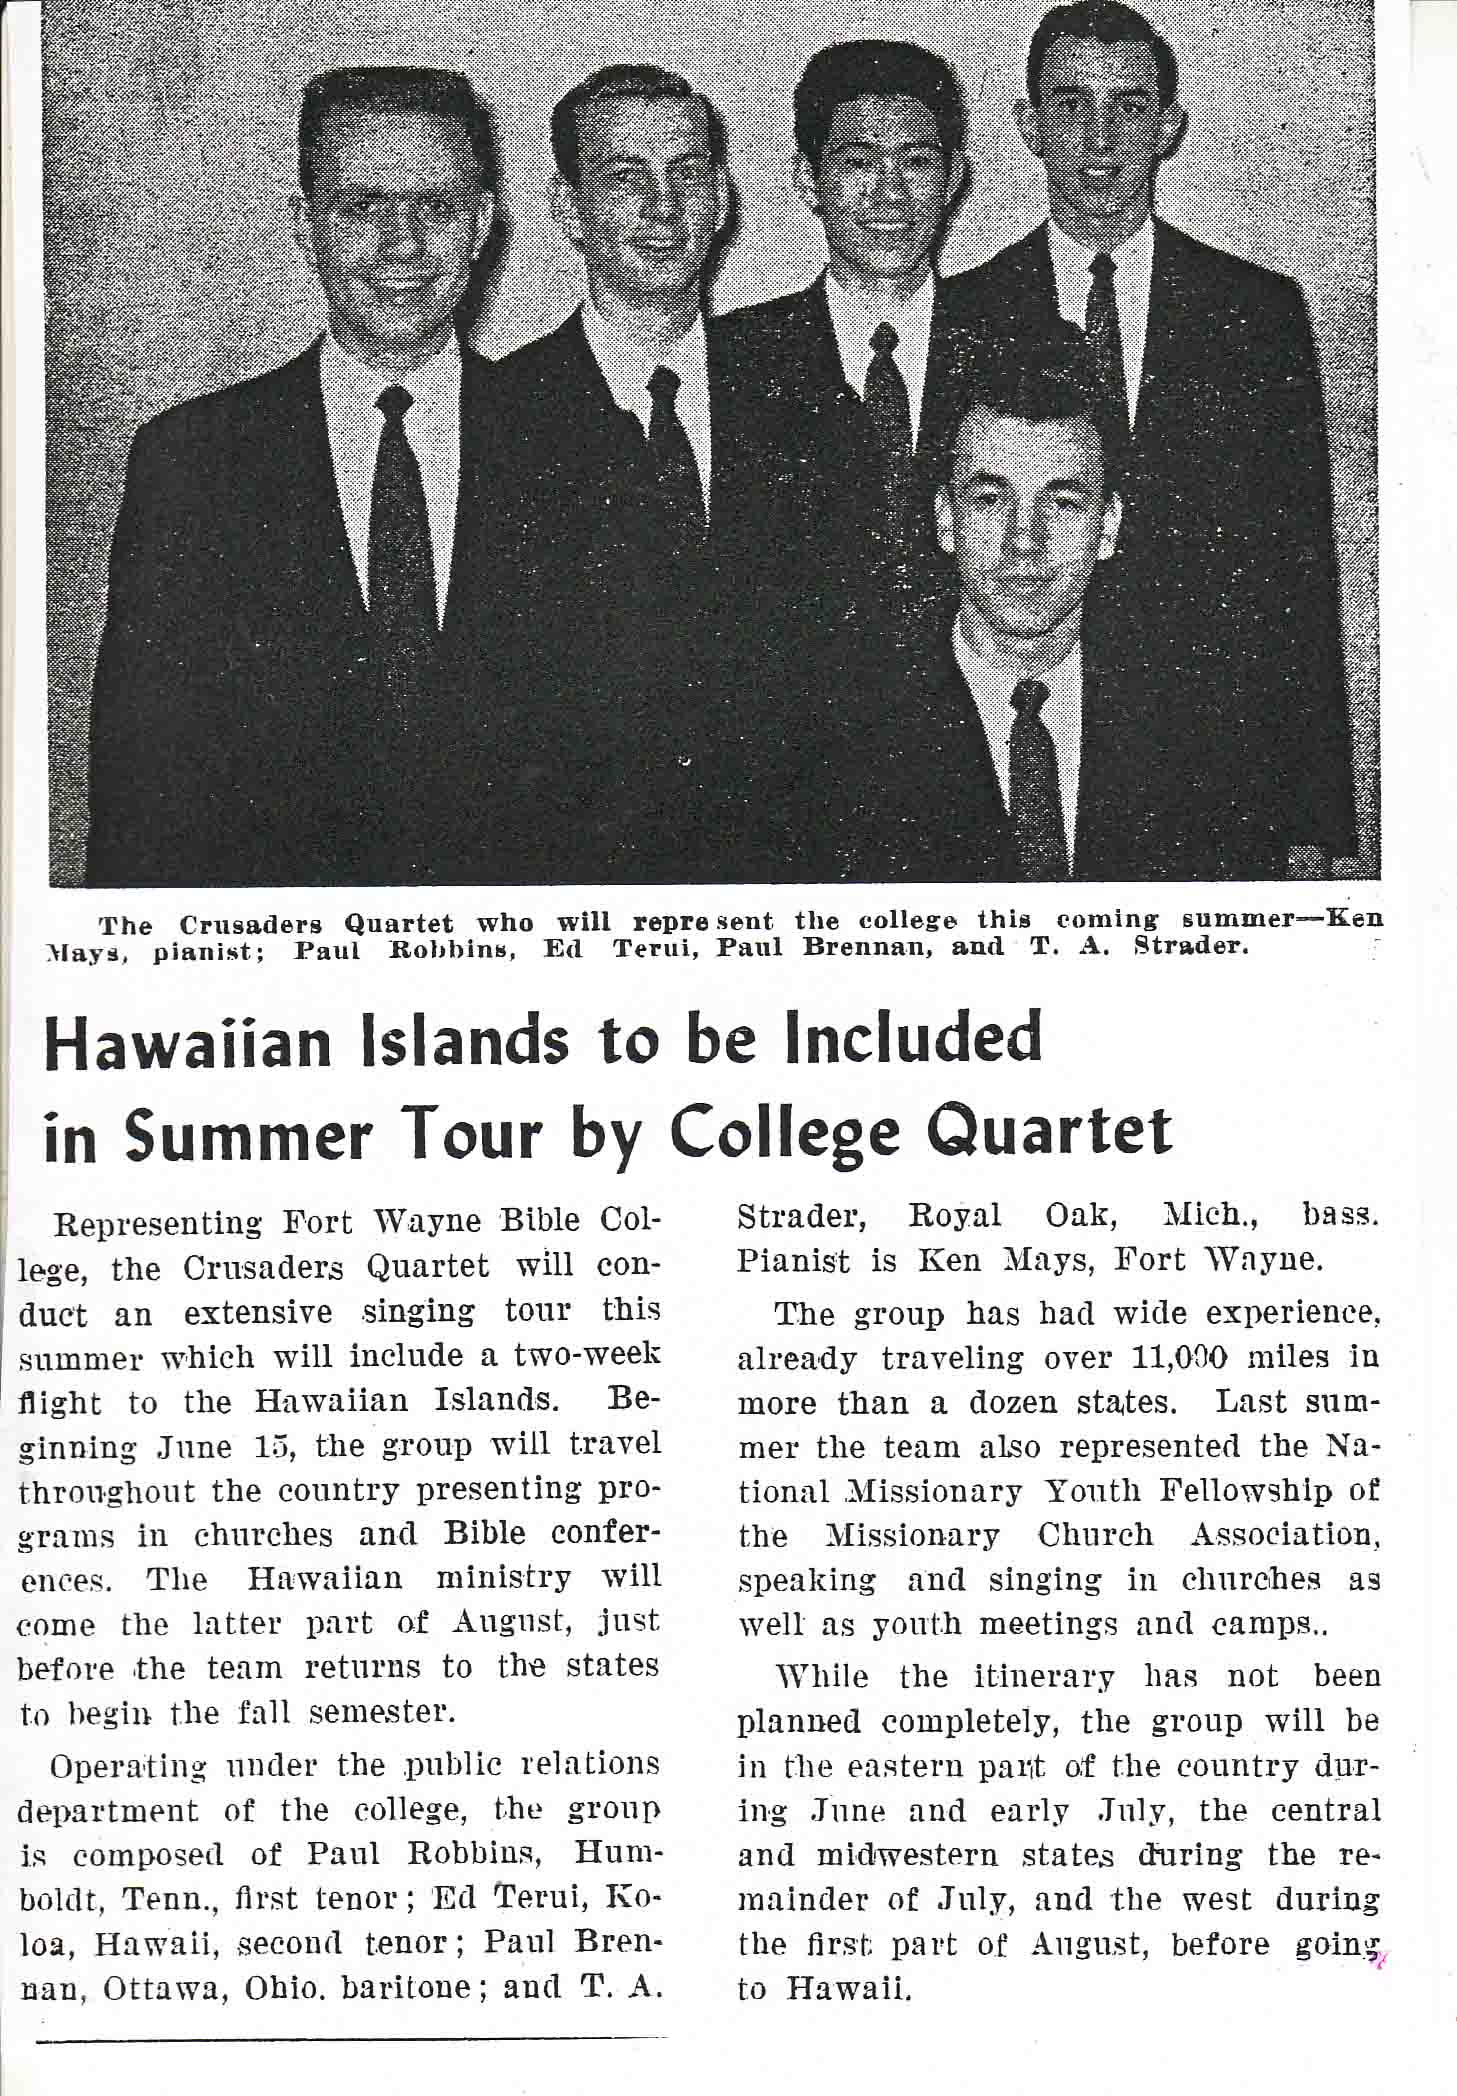 1958 Crusaders Quartet newspaper clipping about summer tour